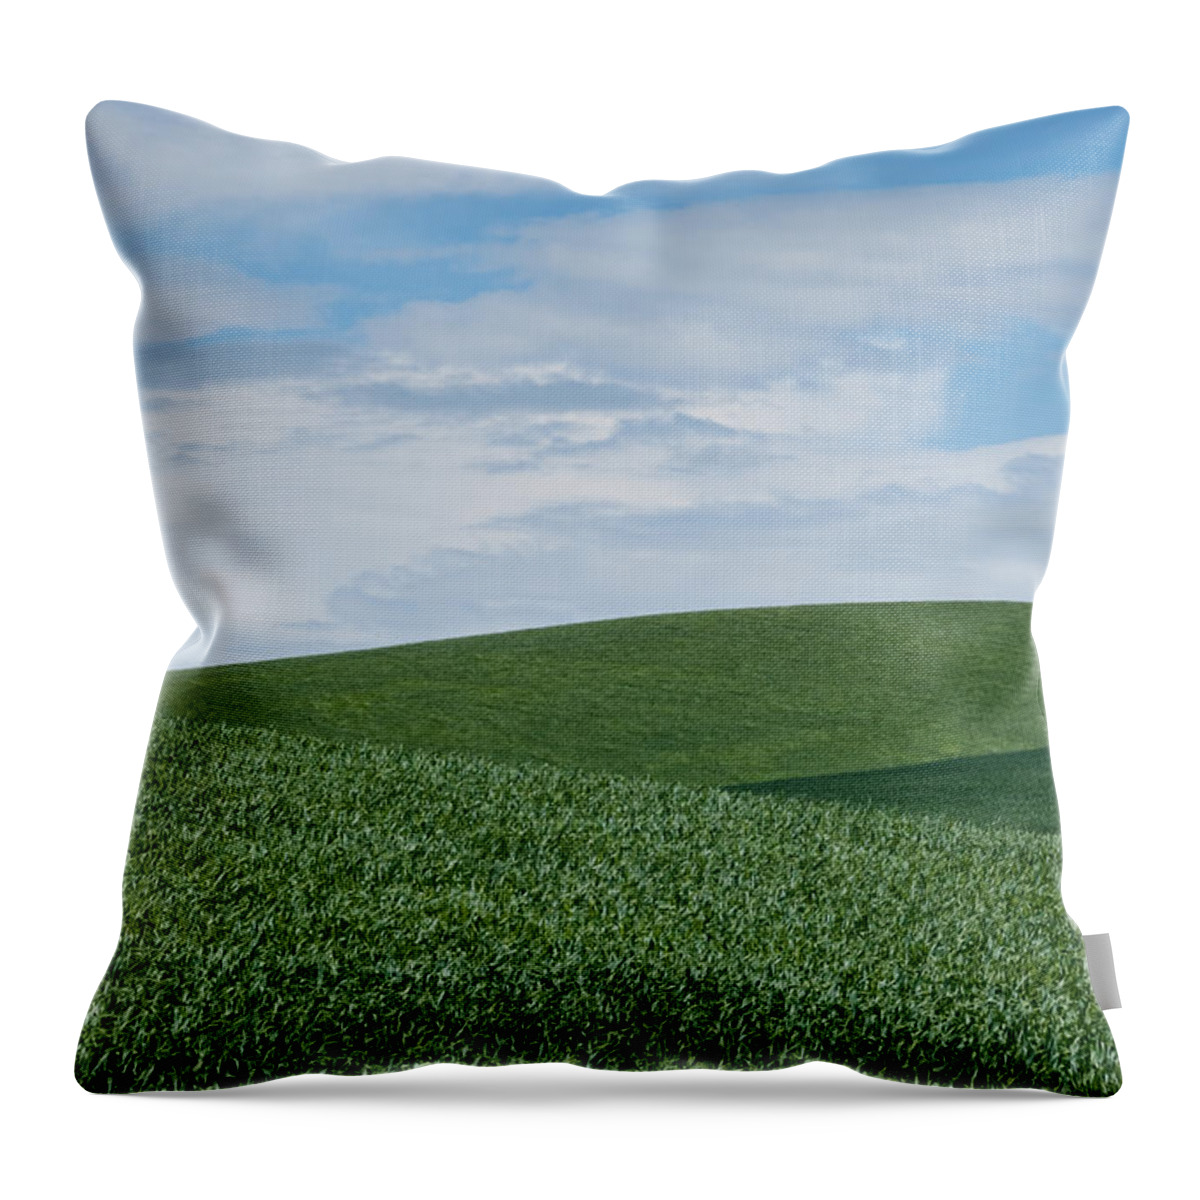 Agricultural Activity Throw Pillow featuring the photograph Palouse Wheatfield by Jeff Goulden